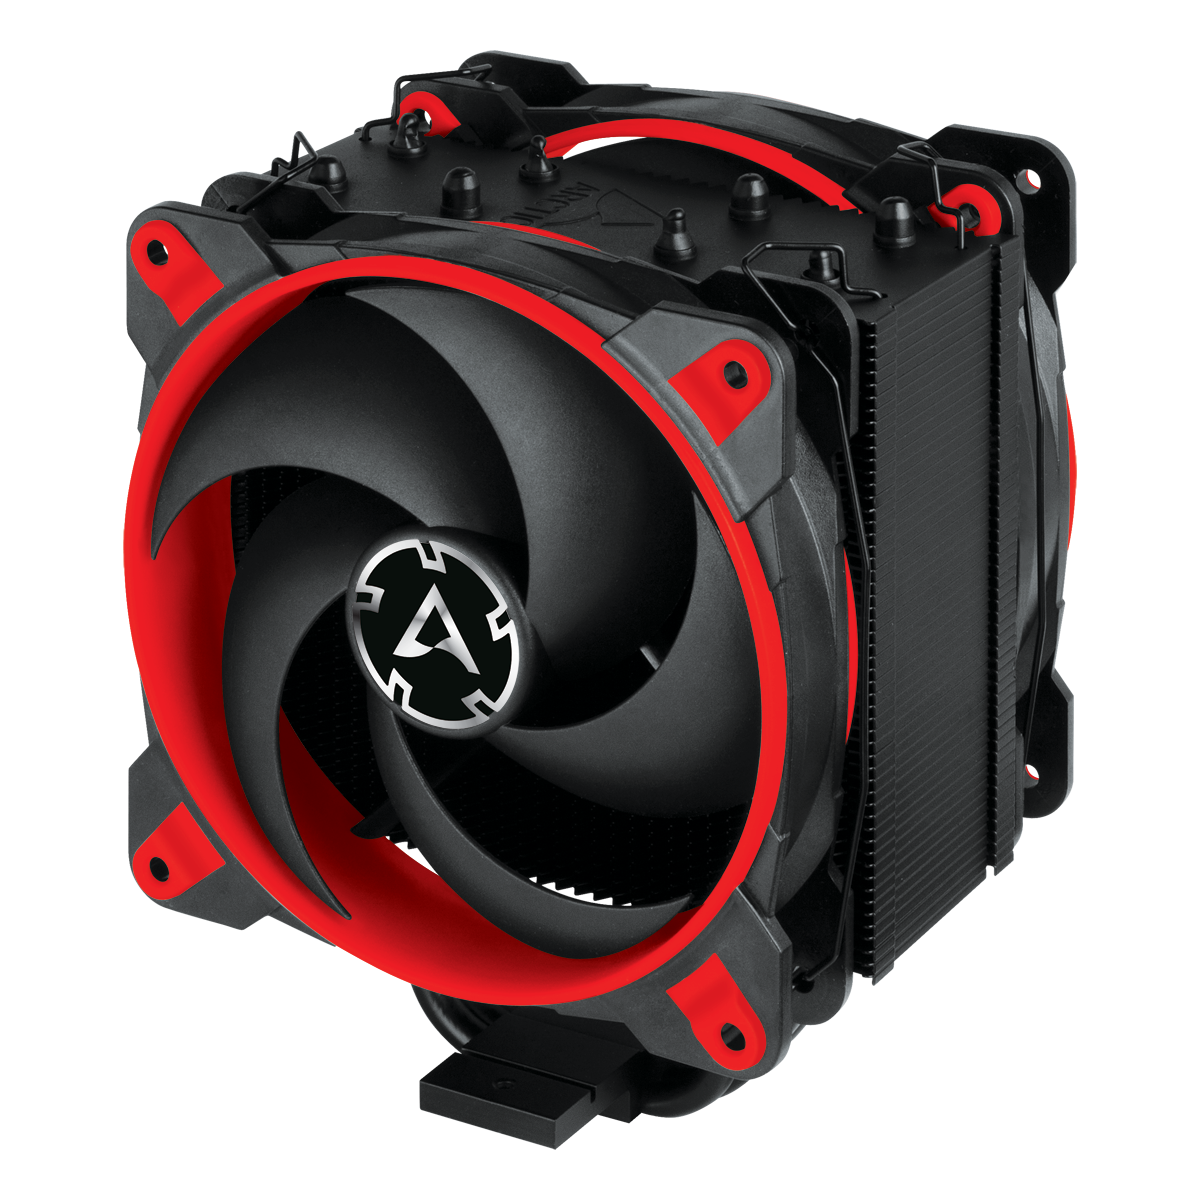 TẢN NHIỆT KHÍ CPU ARCTIC FREEZER 34 ESPORTS DUO RED (ACFRE00060A)